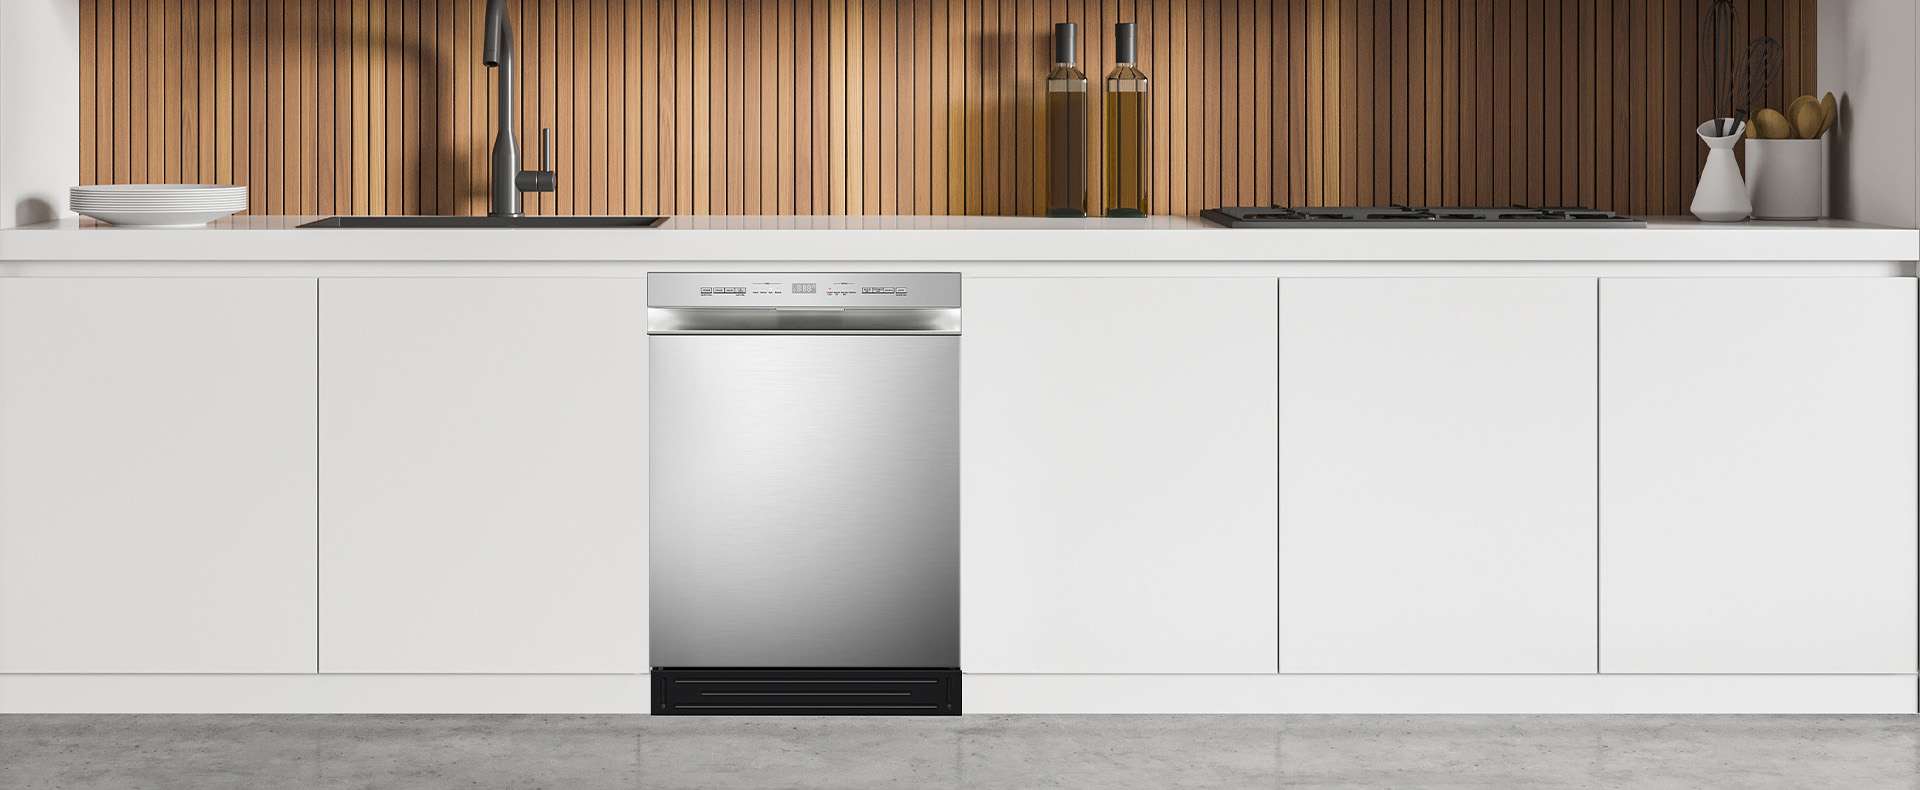 Midea - 52 dBA Built In Dishwasher in Stainless - MDF24P2BST